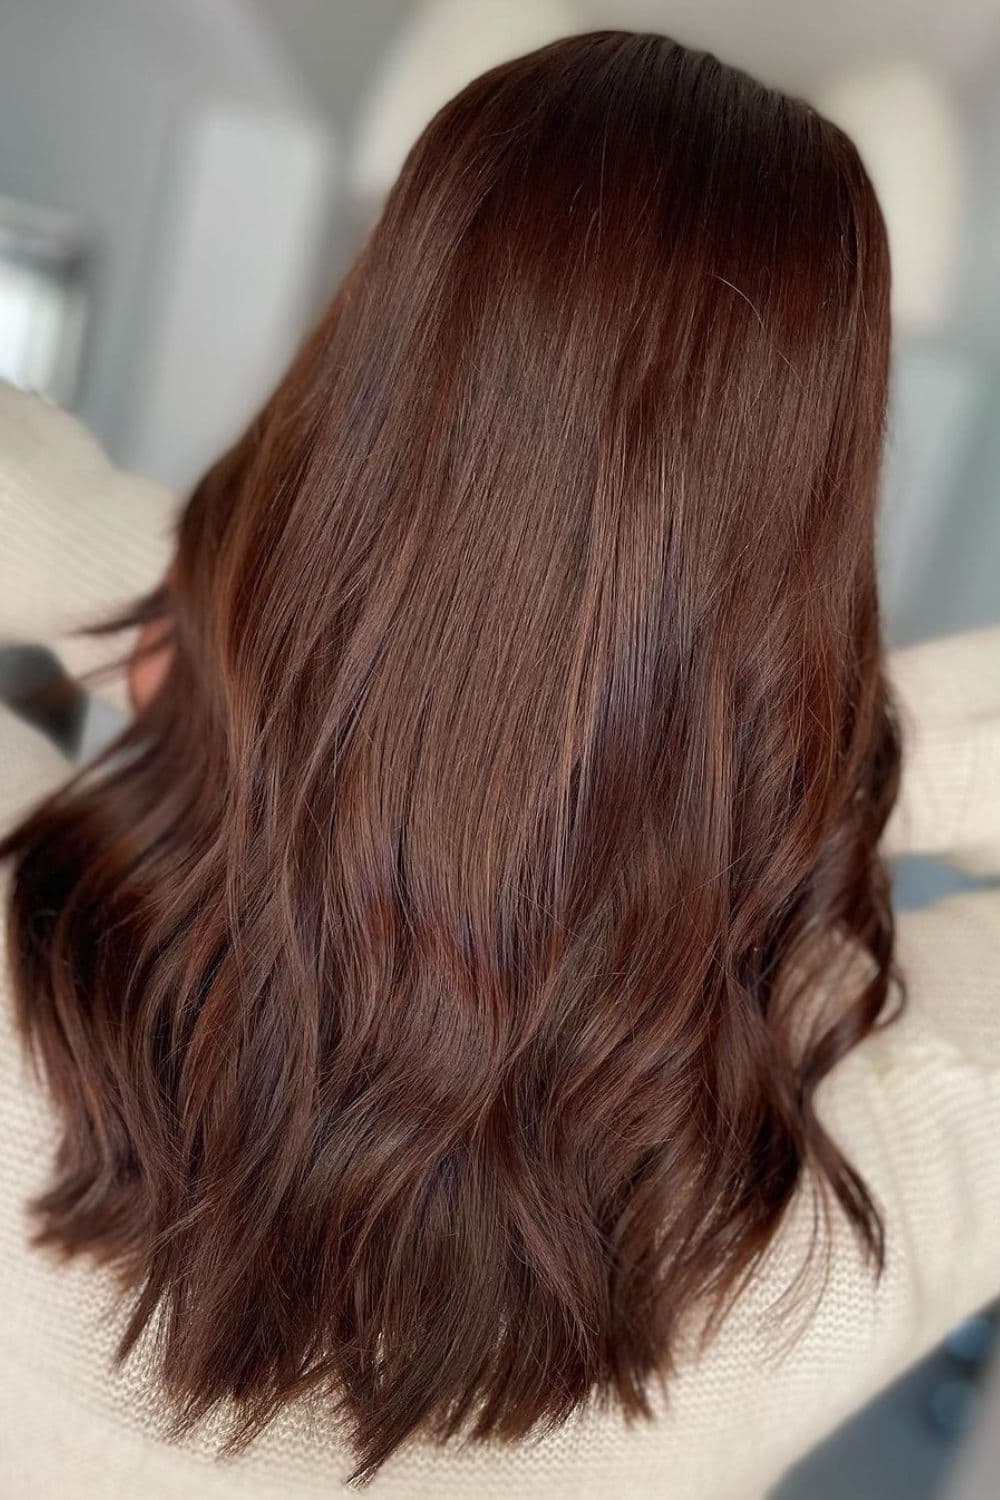 A woman with long chocolate brown hair.